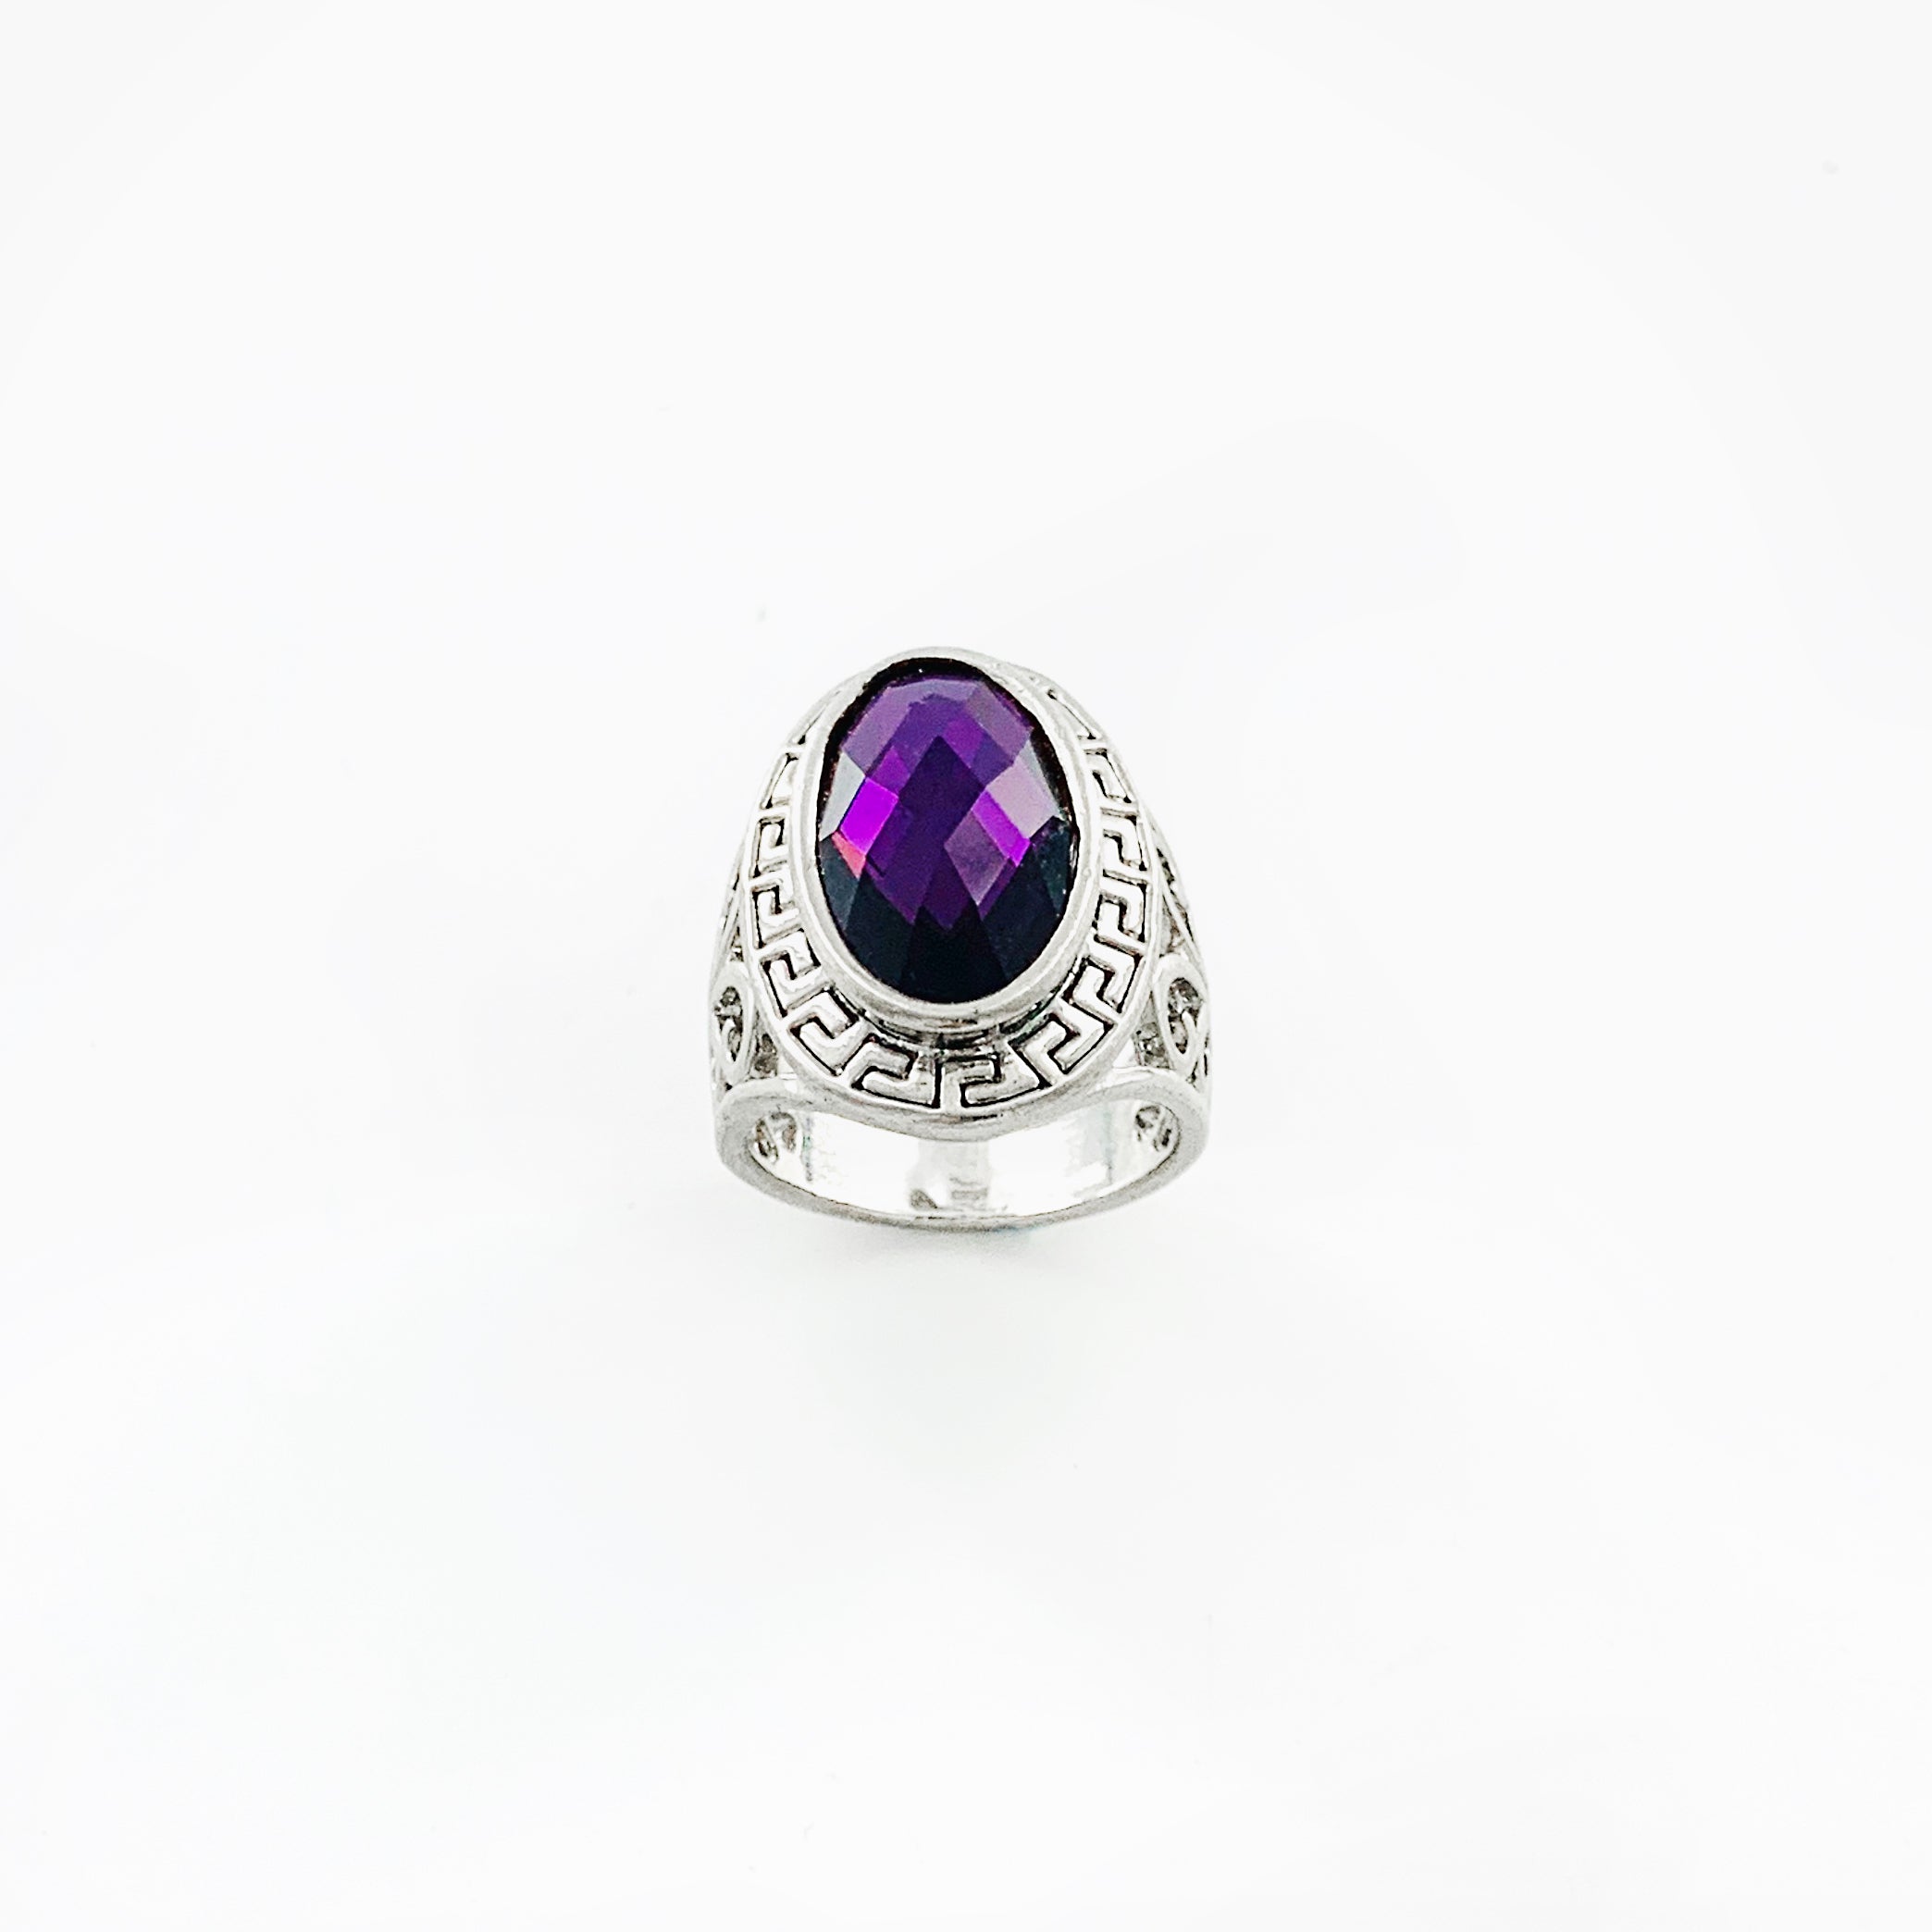 Art deco inspired silver ring with purple stone